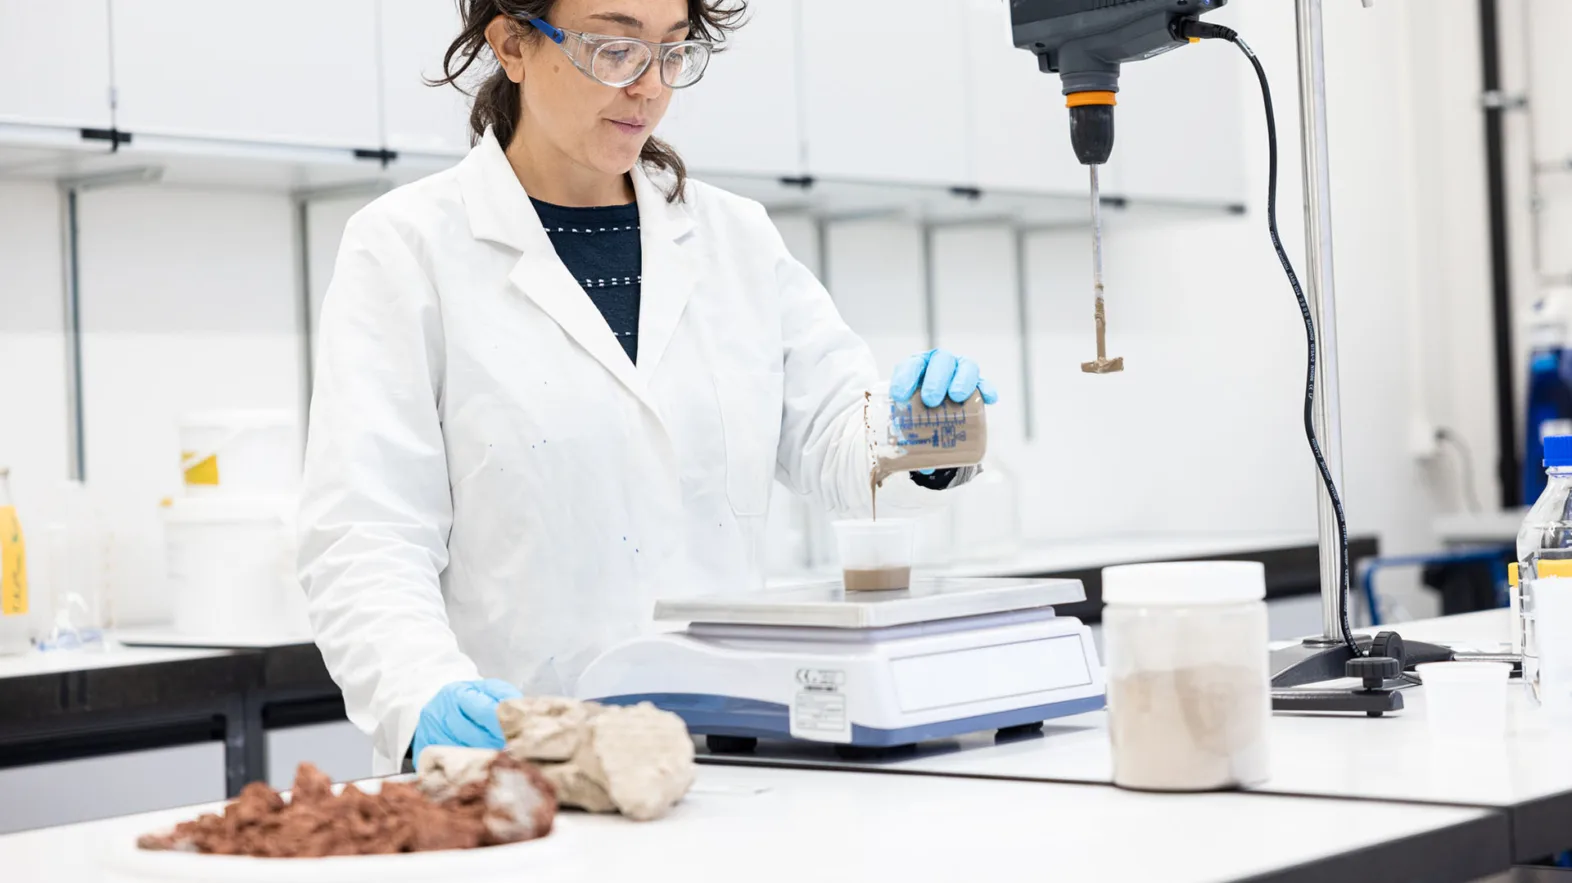 A woman wearing a white lab coat, goggles and gloves works in a lab.